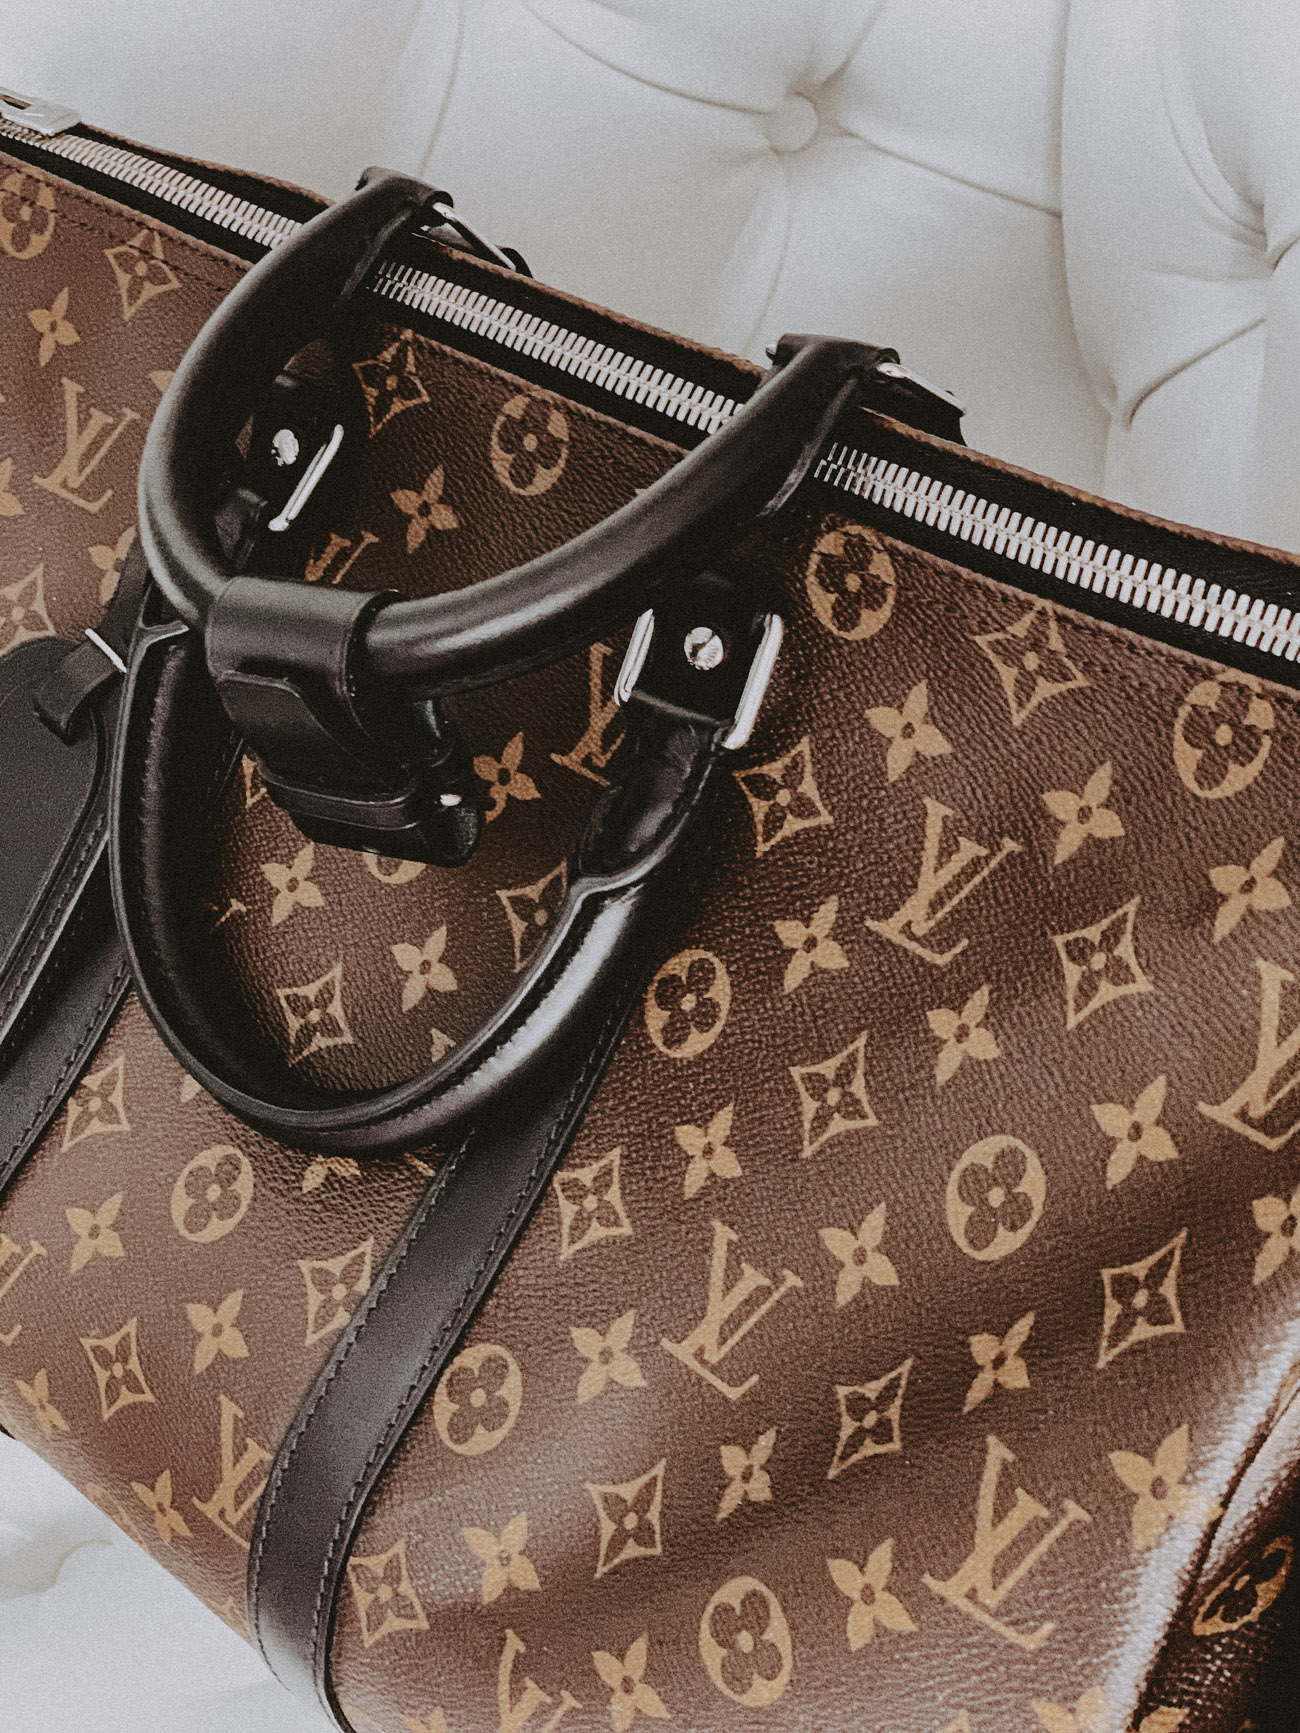 BAG REVIEW: Louis Vuitton Keepall Bandoulière 45 - BLONDIE IN THE CITY